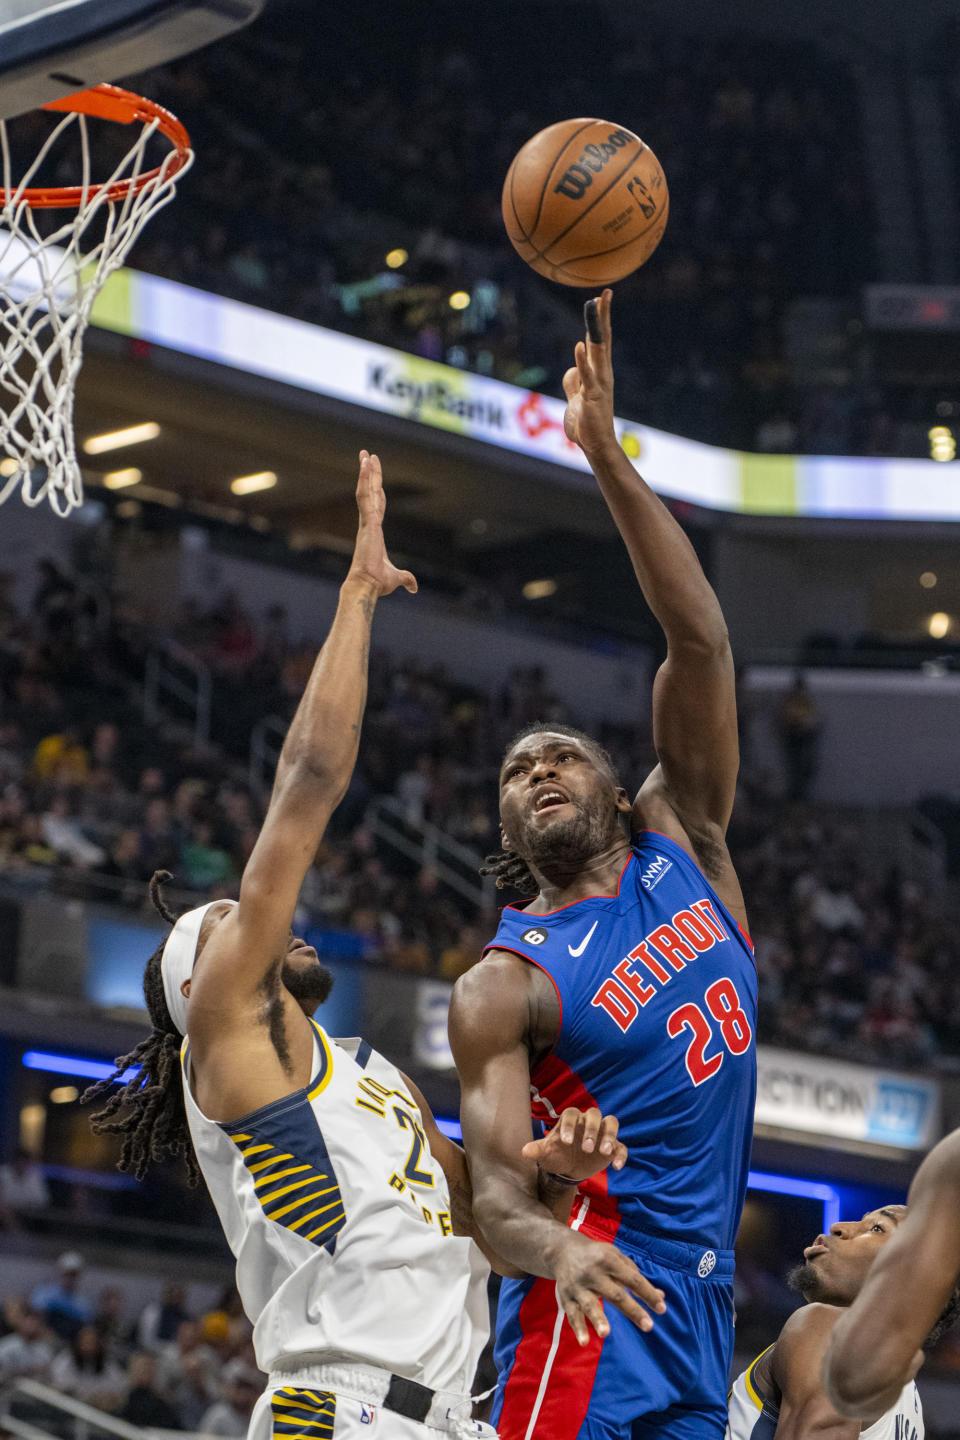 Detroit Pistons center Isaiah Stewart (28) shoots over Indiana Pacers forward Isaiah Jackson (22) during the first half of an NBA basketball game in Indianapolis, Saturday, Oct. 22, 2022. (AP Photo/Doug McSchooler)